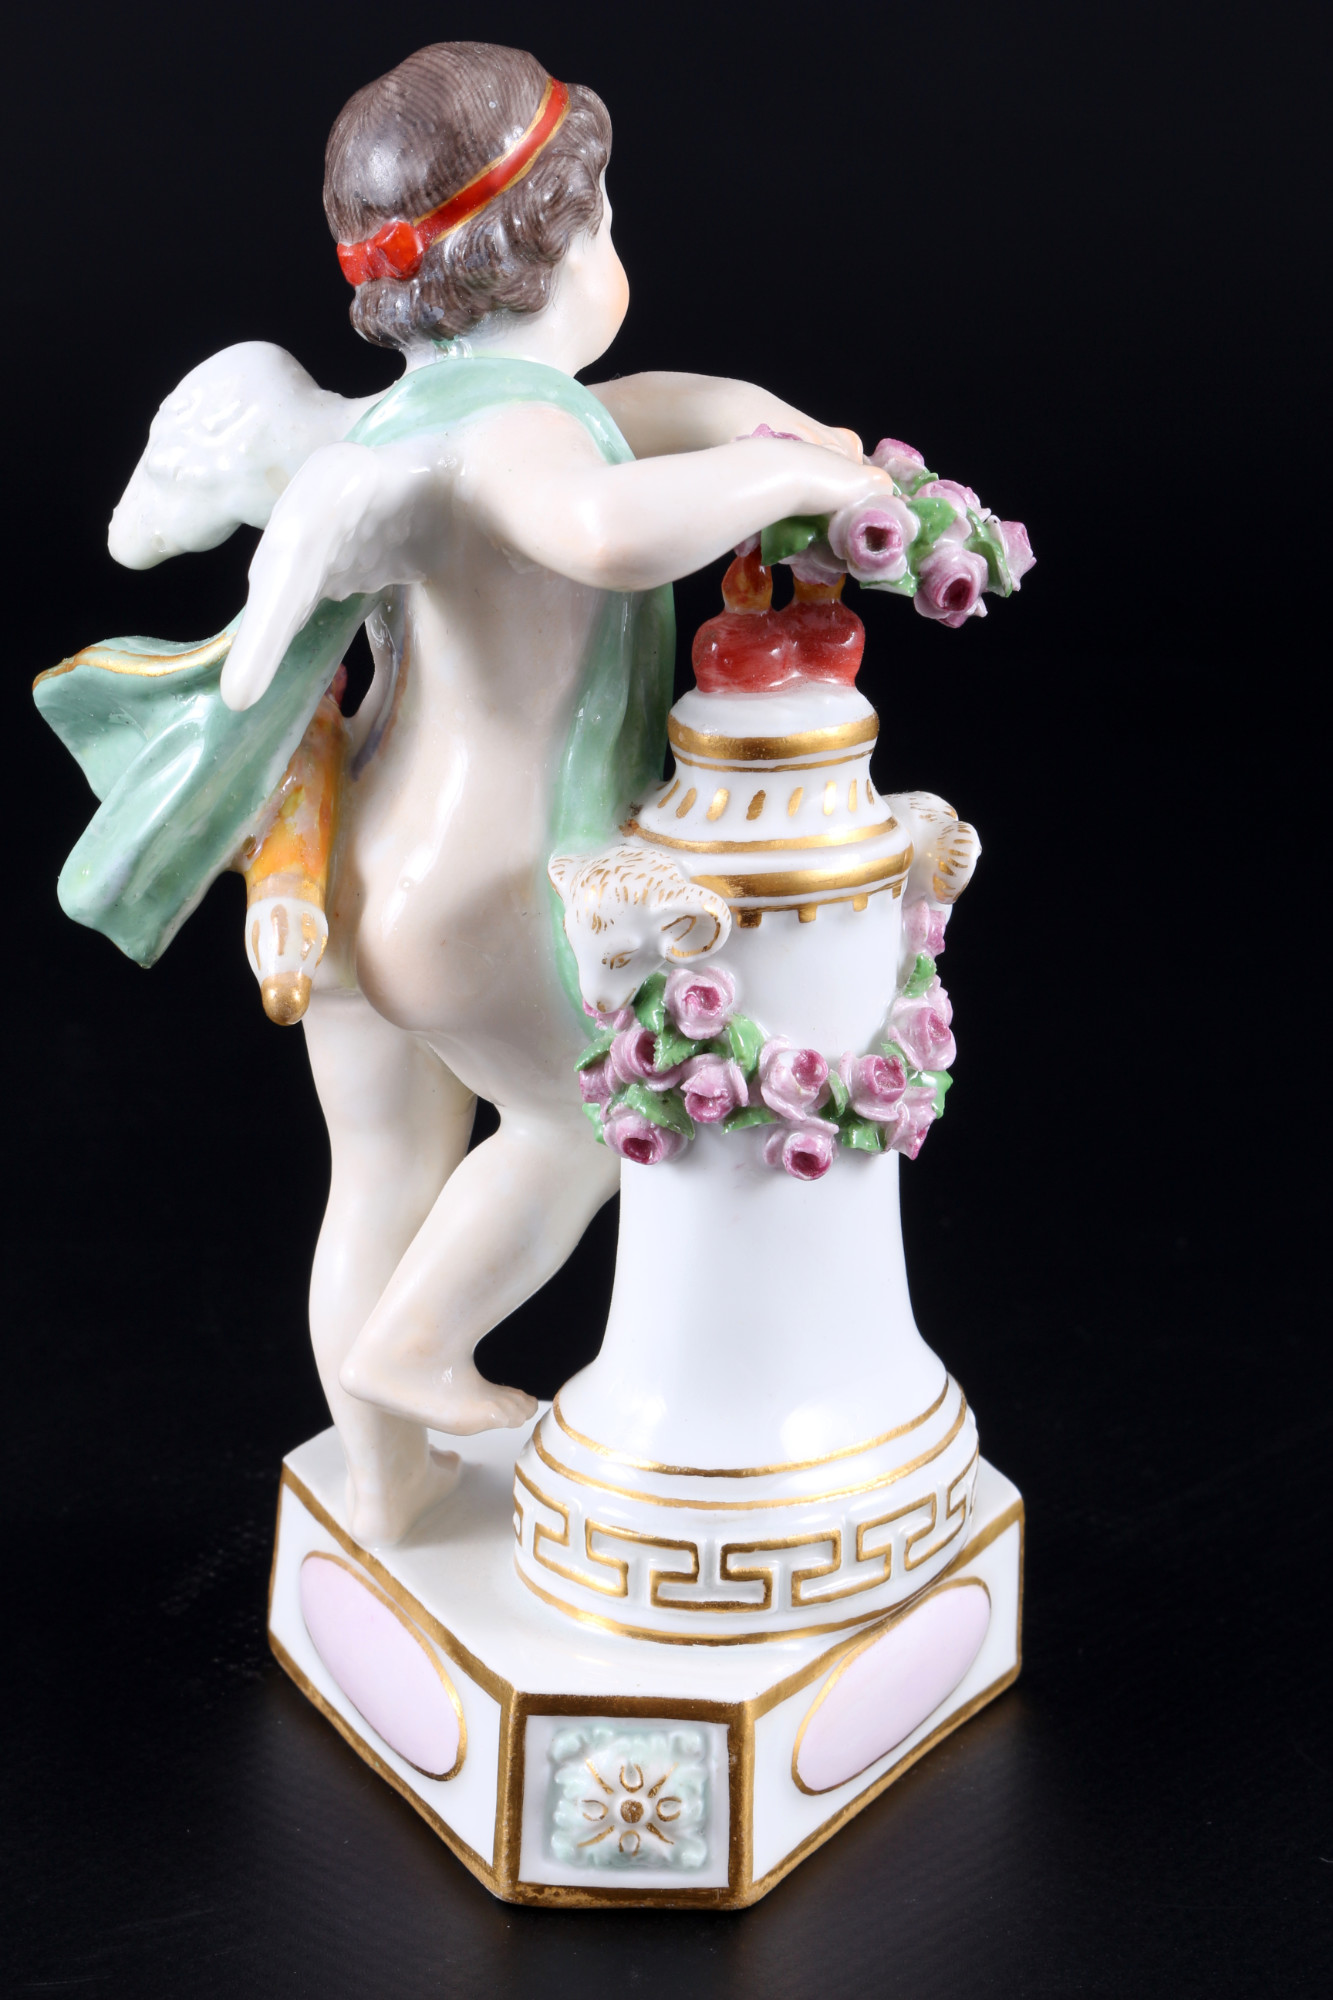 Meissen Devisenkind "Je les couronne" 1.Wahl, knob mark, cupid with floral wreath 1st choice, - Image 4 of 5